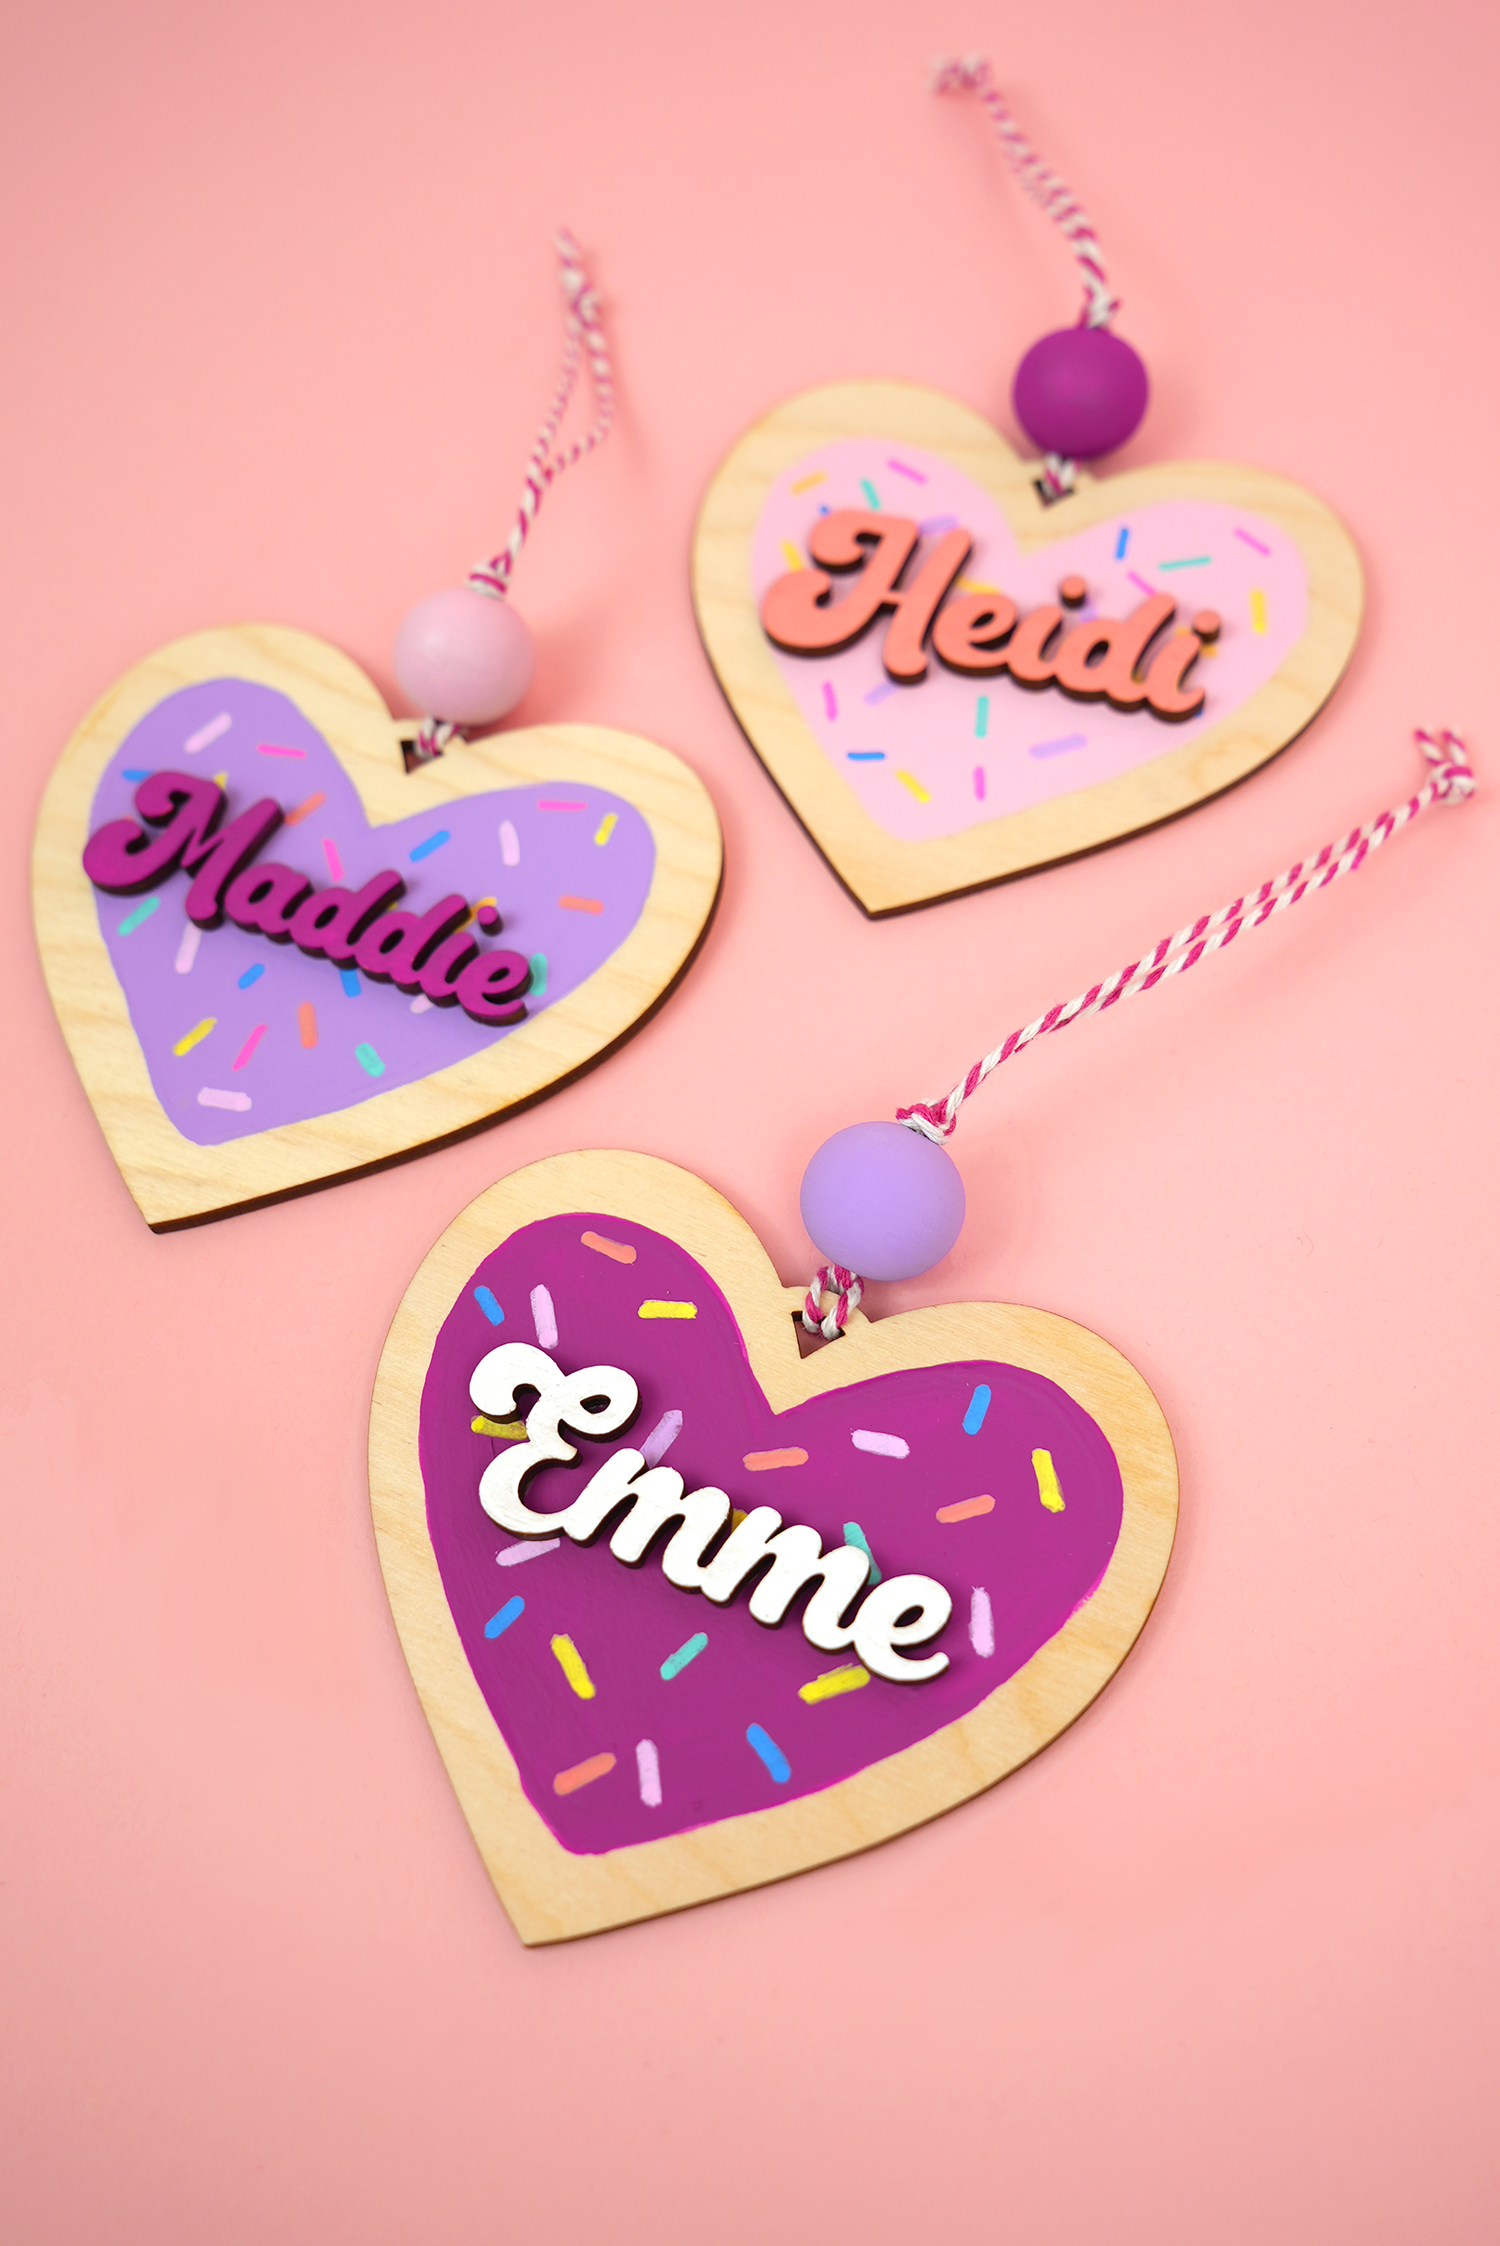 Three cute heart ornaments cut from wood and painted to look like Valentine cookies on a pink background